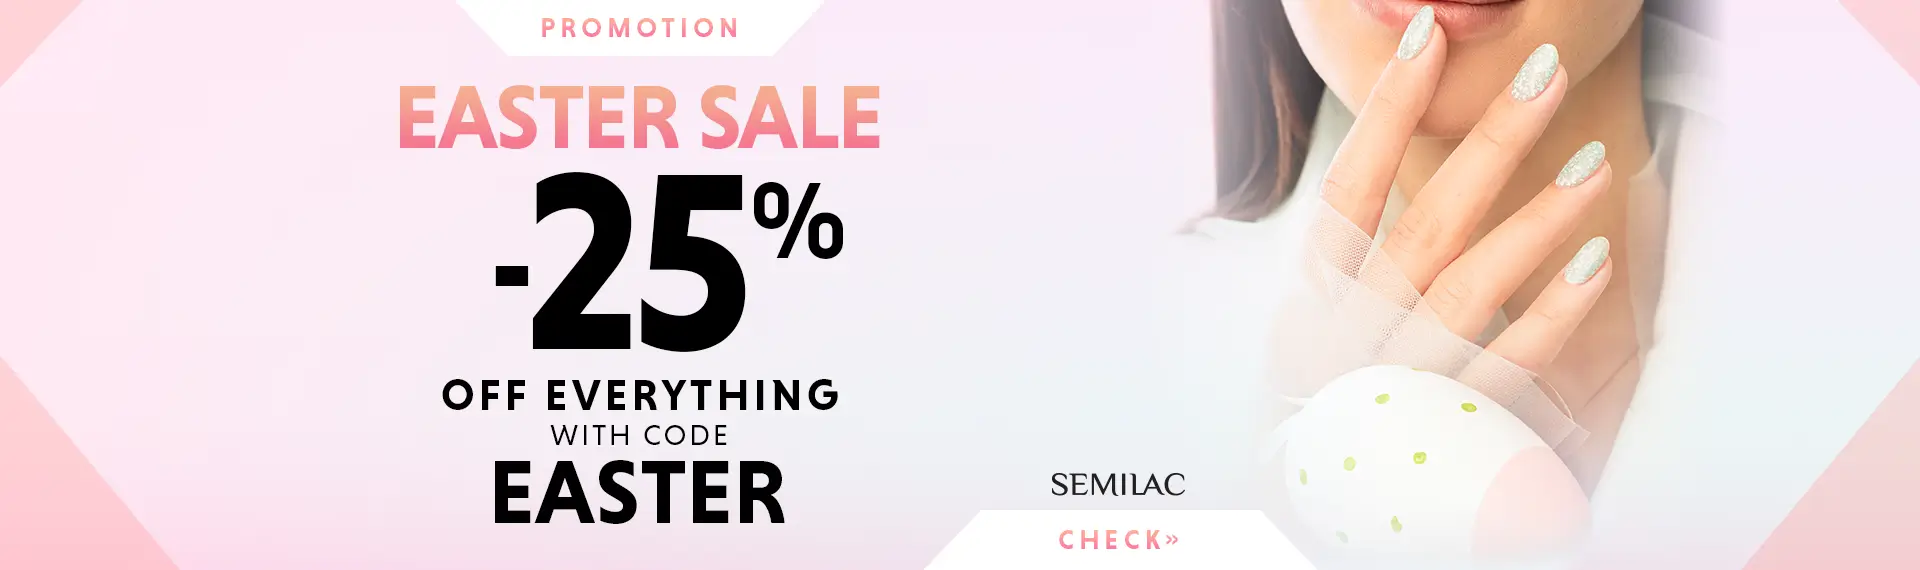 EASTER SALE -25% OFF EVERYTHING with code EASTER